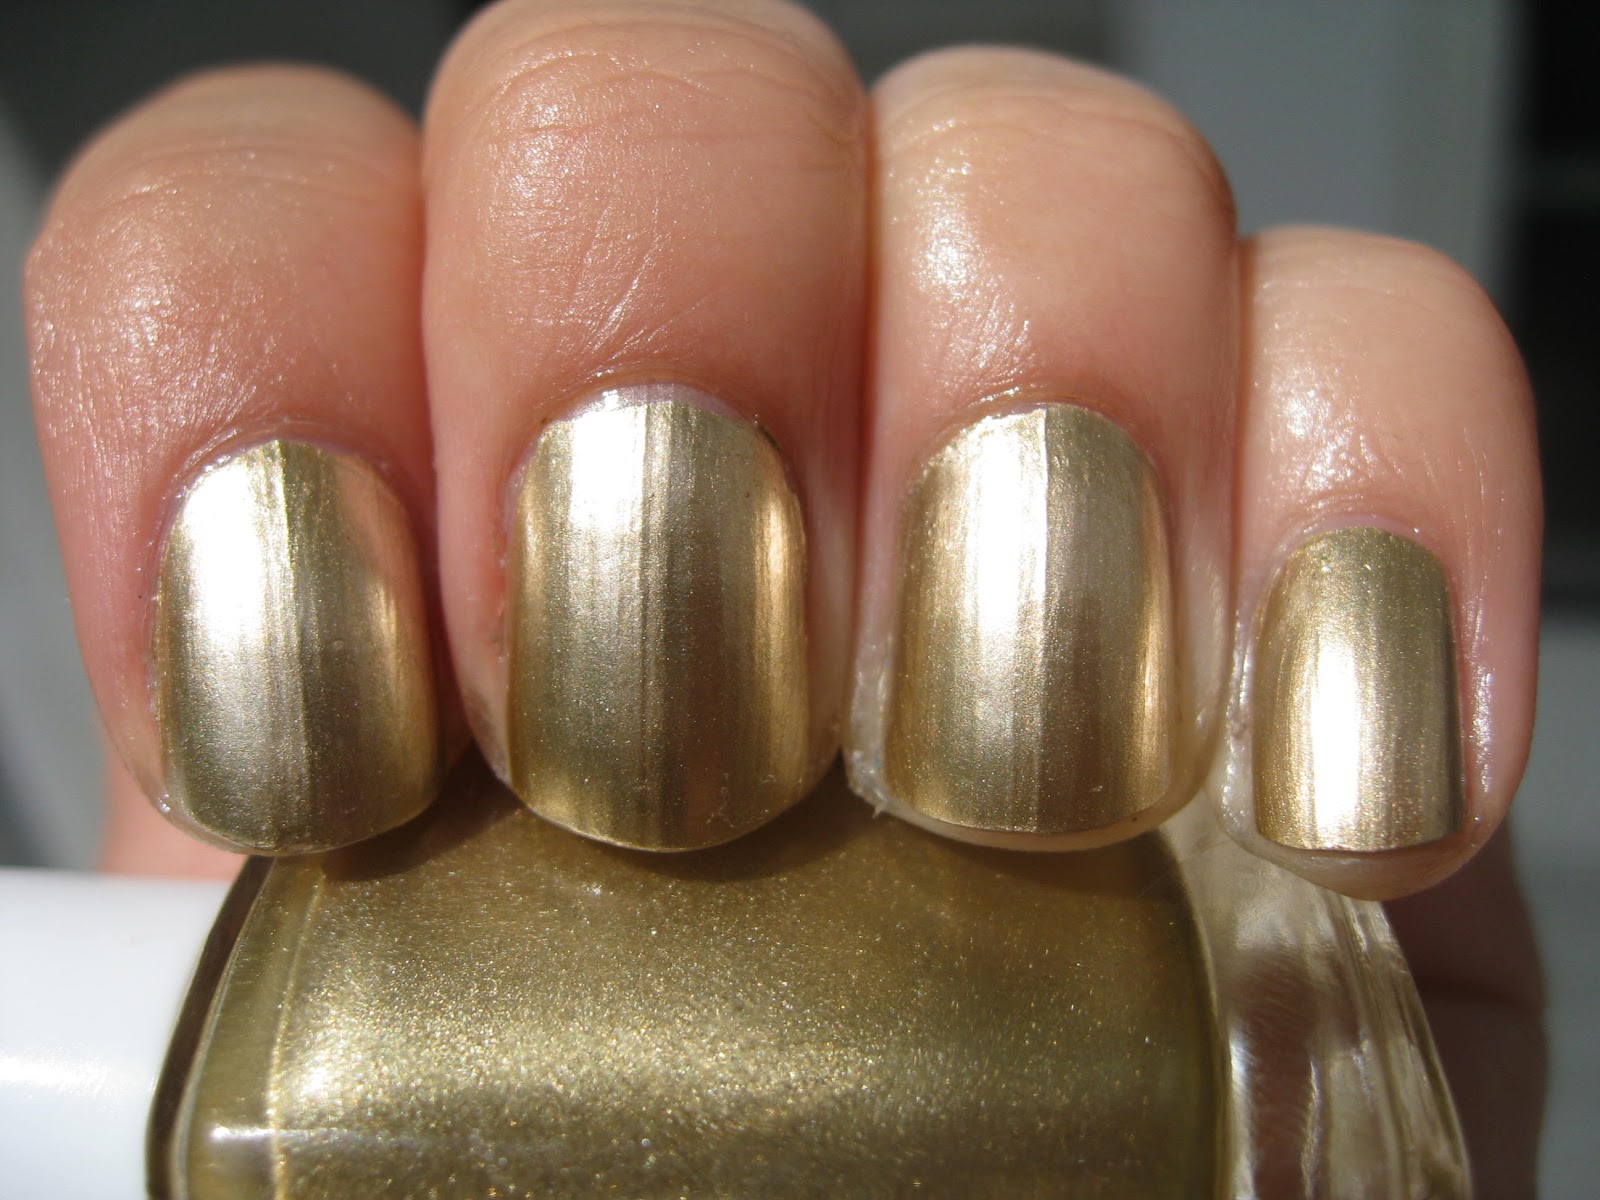 2. Essie Nail Polish in "Good as Gold" - wide 4